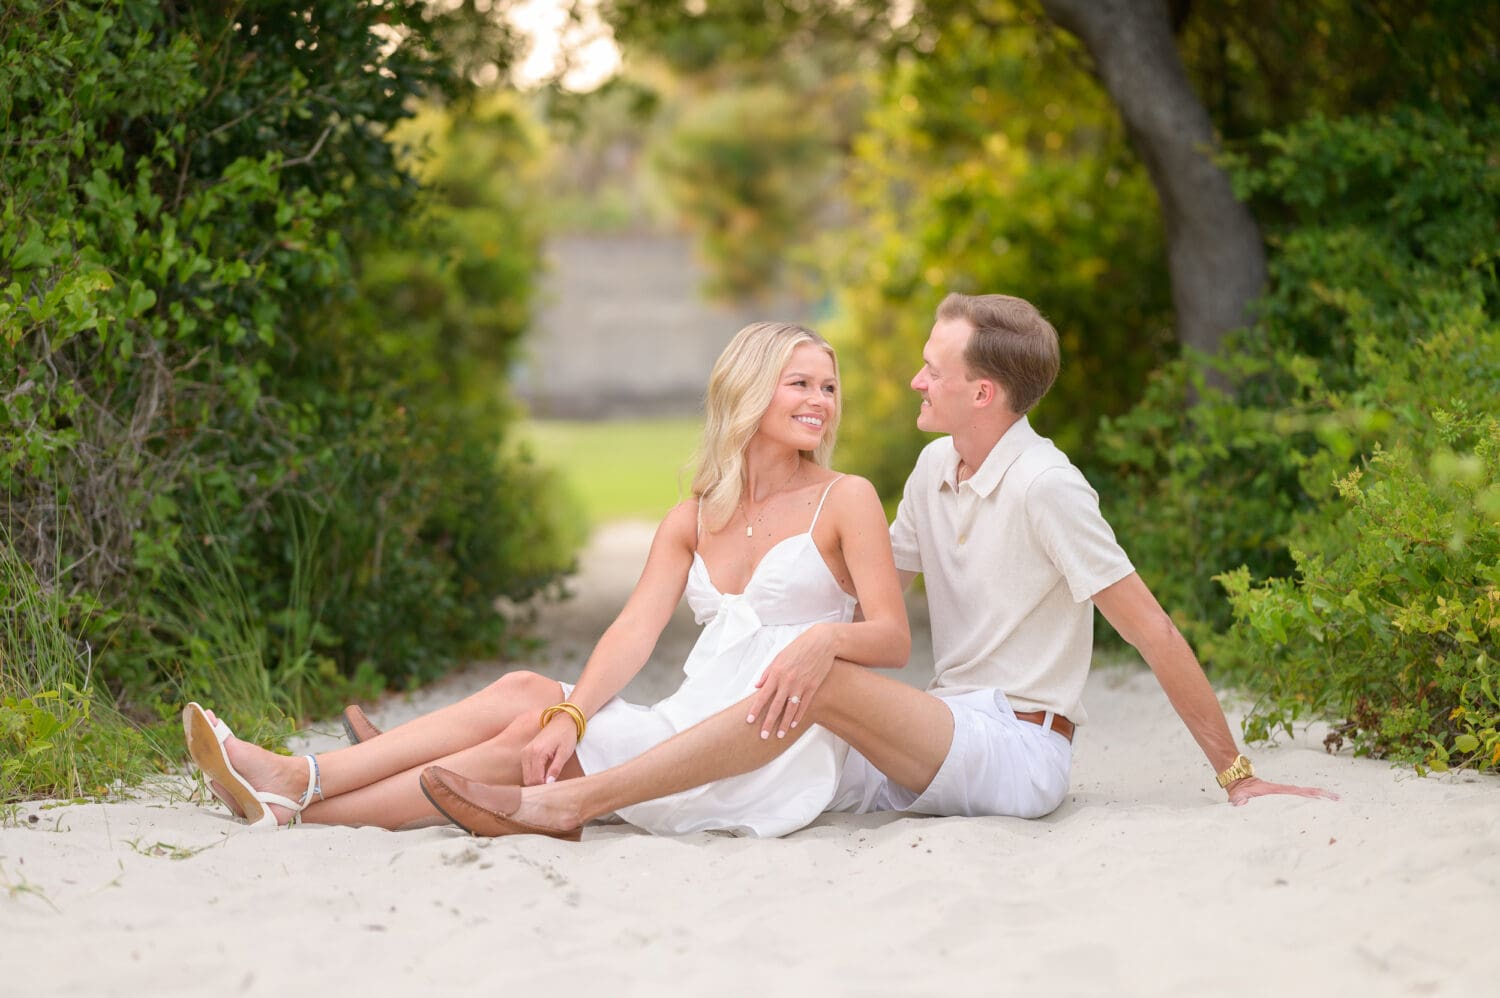 Cute couple for engagement pictures with a beautiful sunset - Huntington Beach State Park